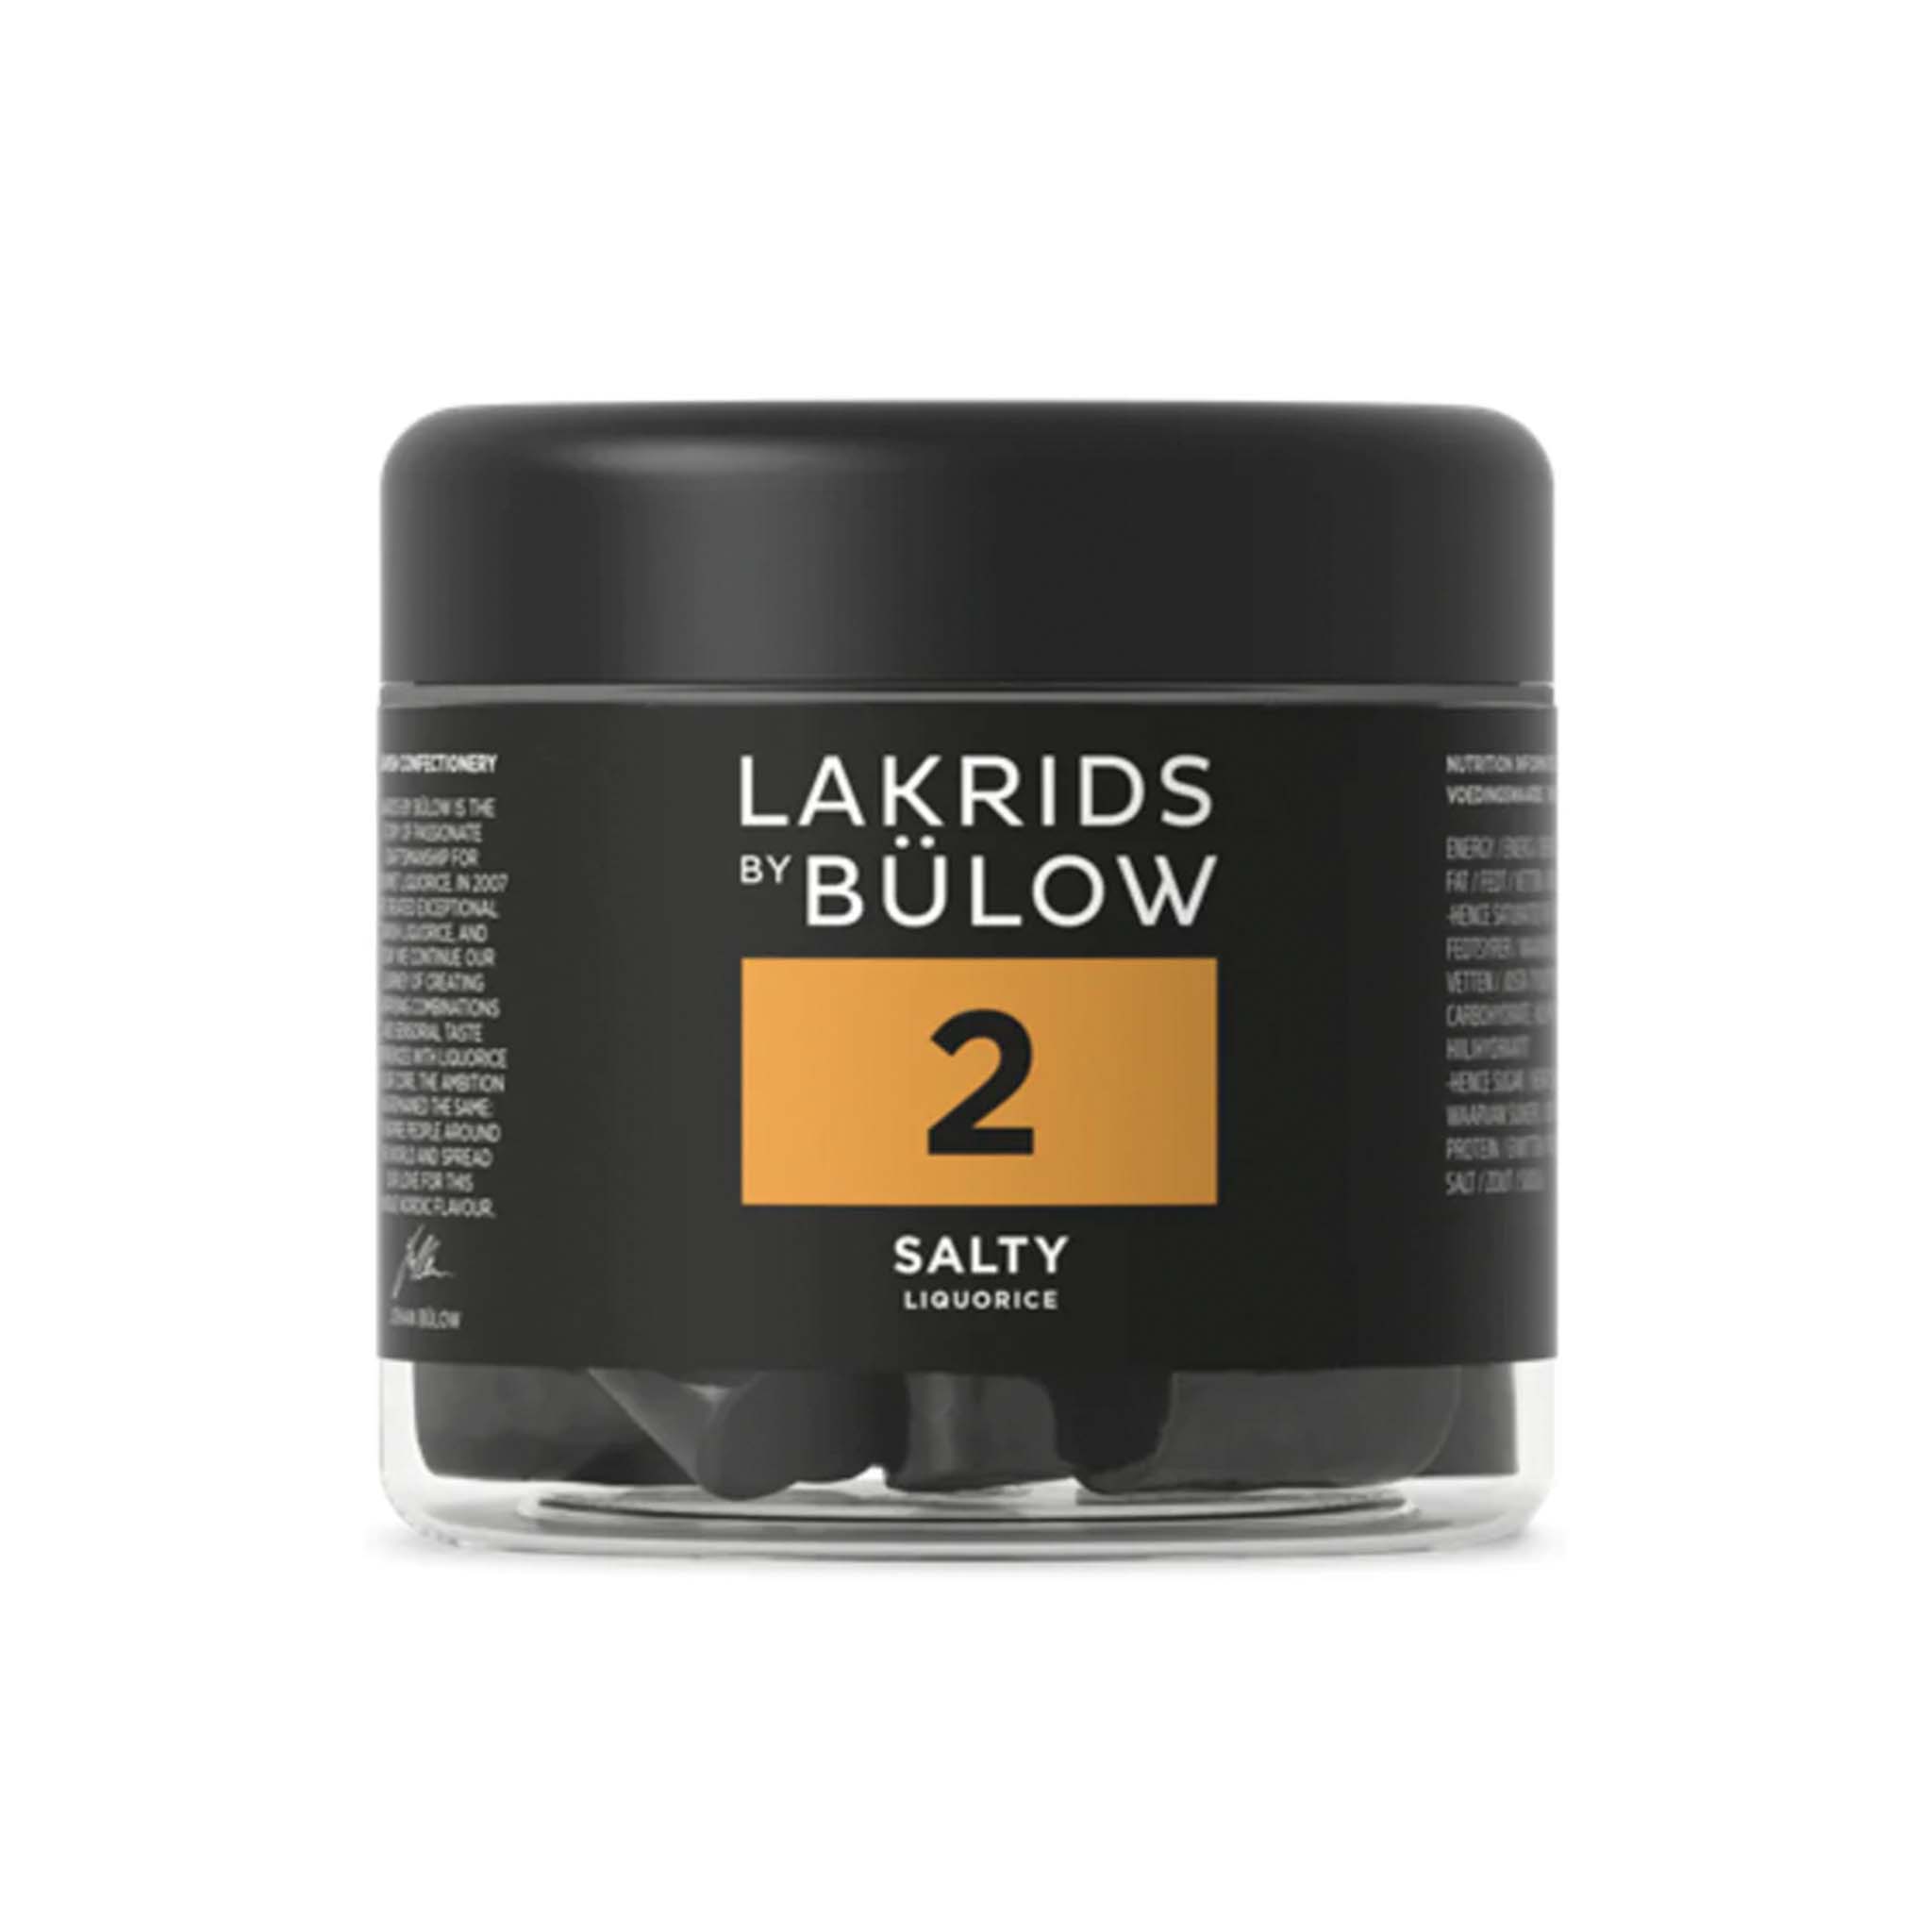 Lakrids by Bulow 2 Salty Licorice